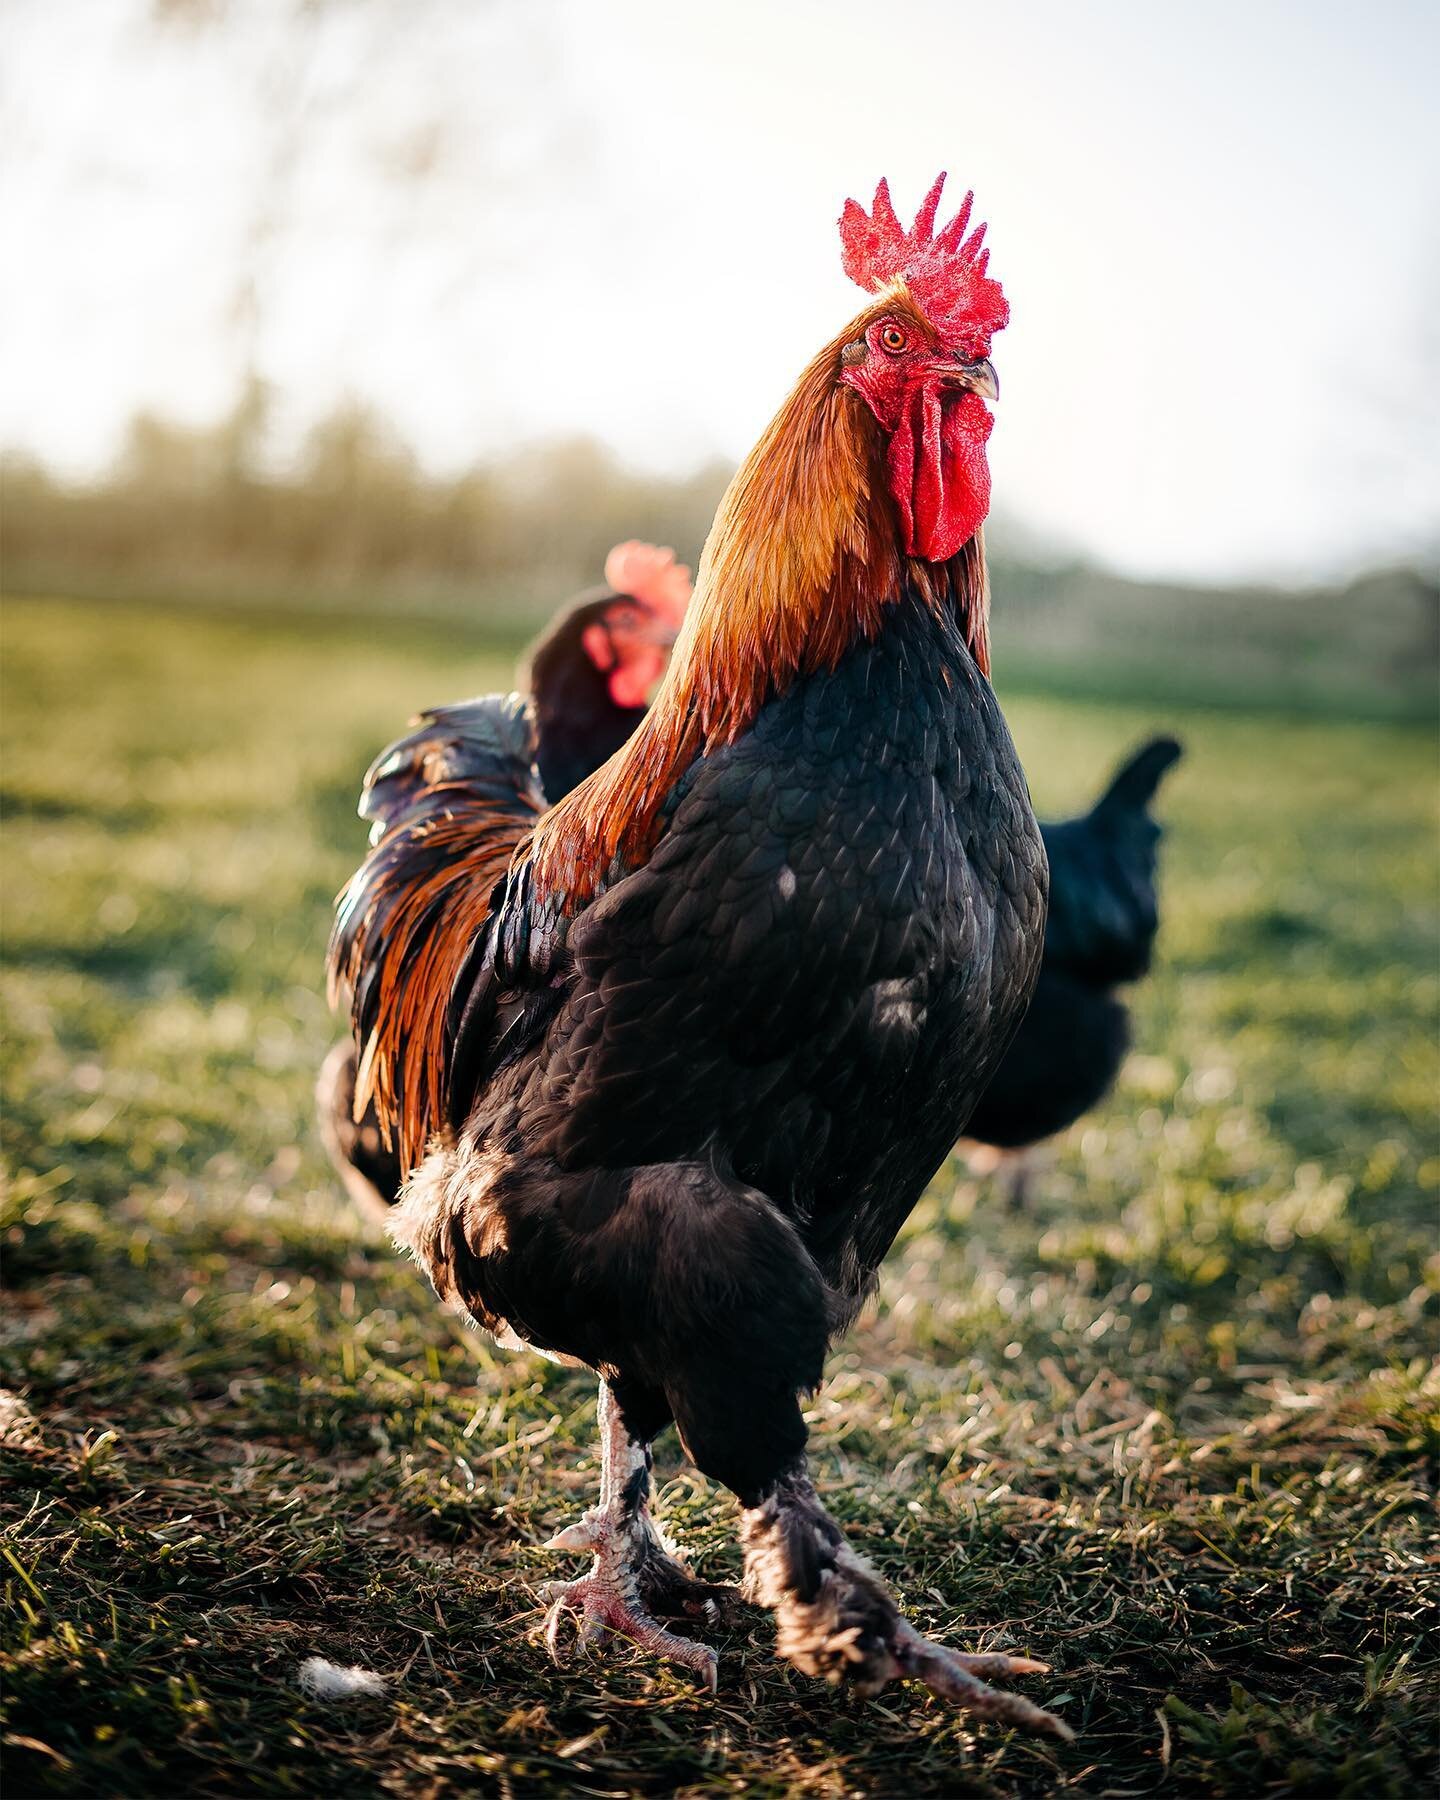 How handsome is this guy?! 😍

Did you know that roosters actually require higher protein levels and less calcium in their diets than laying hens do?  In fact, too much calcium can be problematic to a rooster&rsquo;s health.  So to keep all of my roo